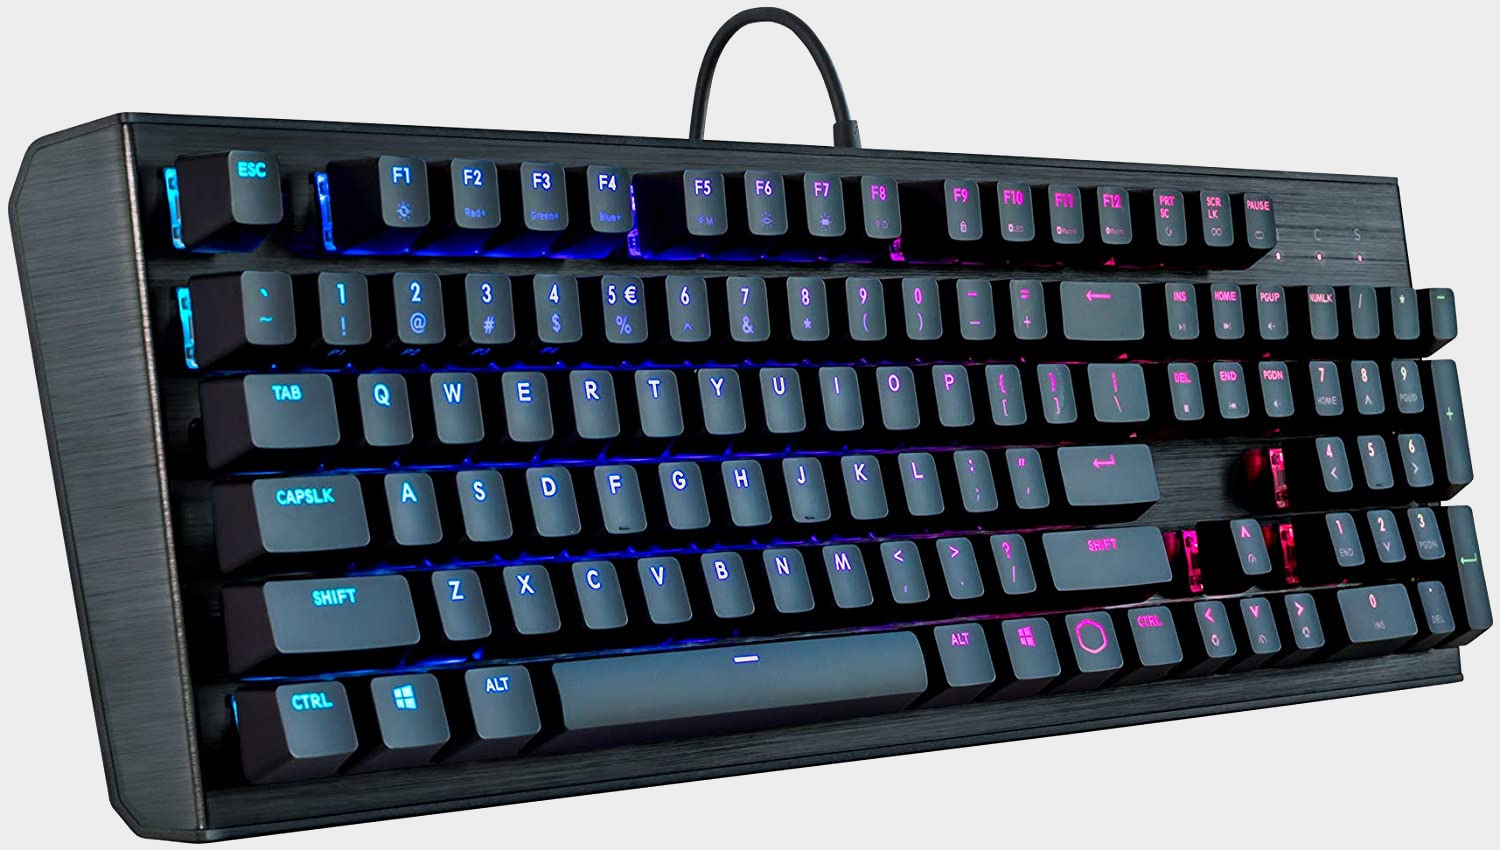  This Cooler Master mechanical keyboard is just $48 right now 